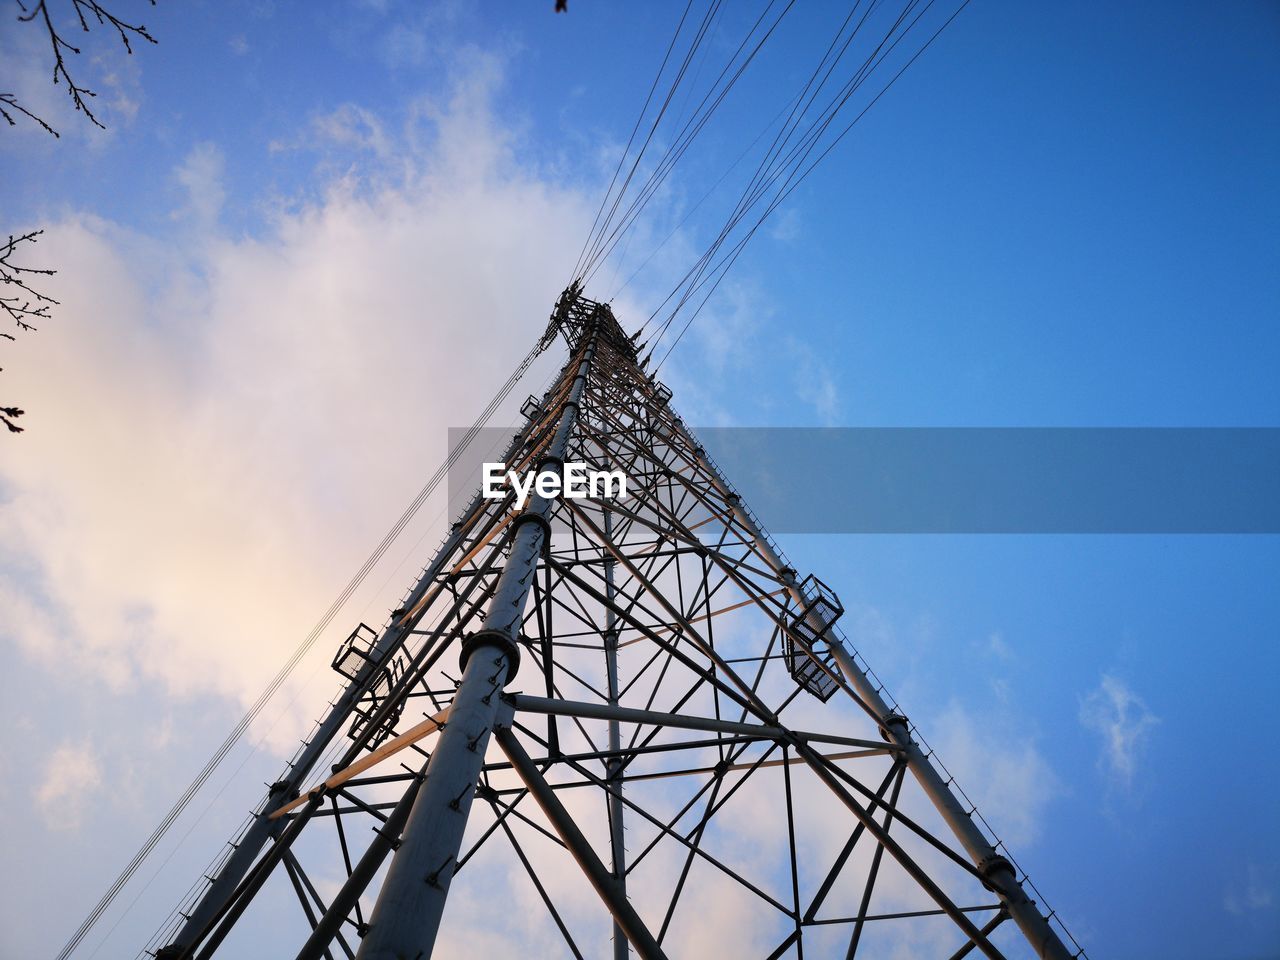 sky, technology, cloud, transmission tower, architecture, overhead power line, built structure, tower, power generation, cable, electricity, blue, electricity pylon, power supply, nature, industry, communication, electrical supply, steel, no people, metal, alloy, global communications, business finance and industry, silhouette, line, sunlight, outdoors, mast, low angle view, power line, looking up, warning sign, sign, electrical grid, business, high voltage sign